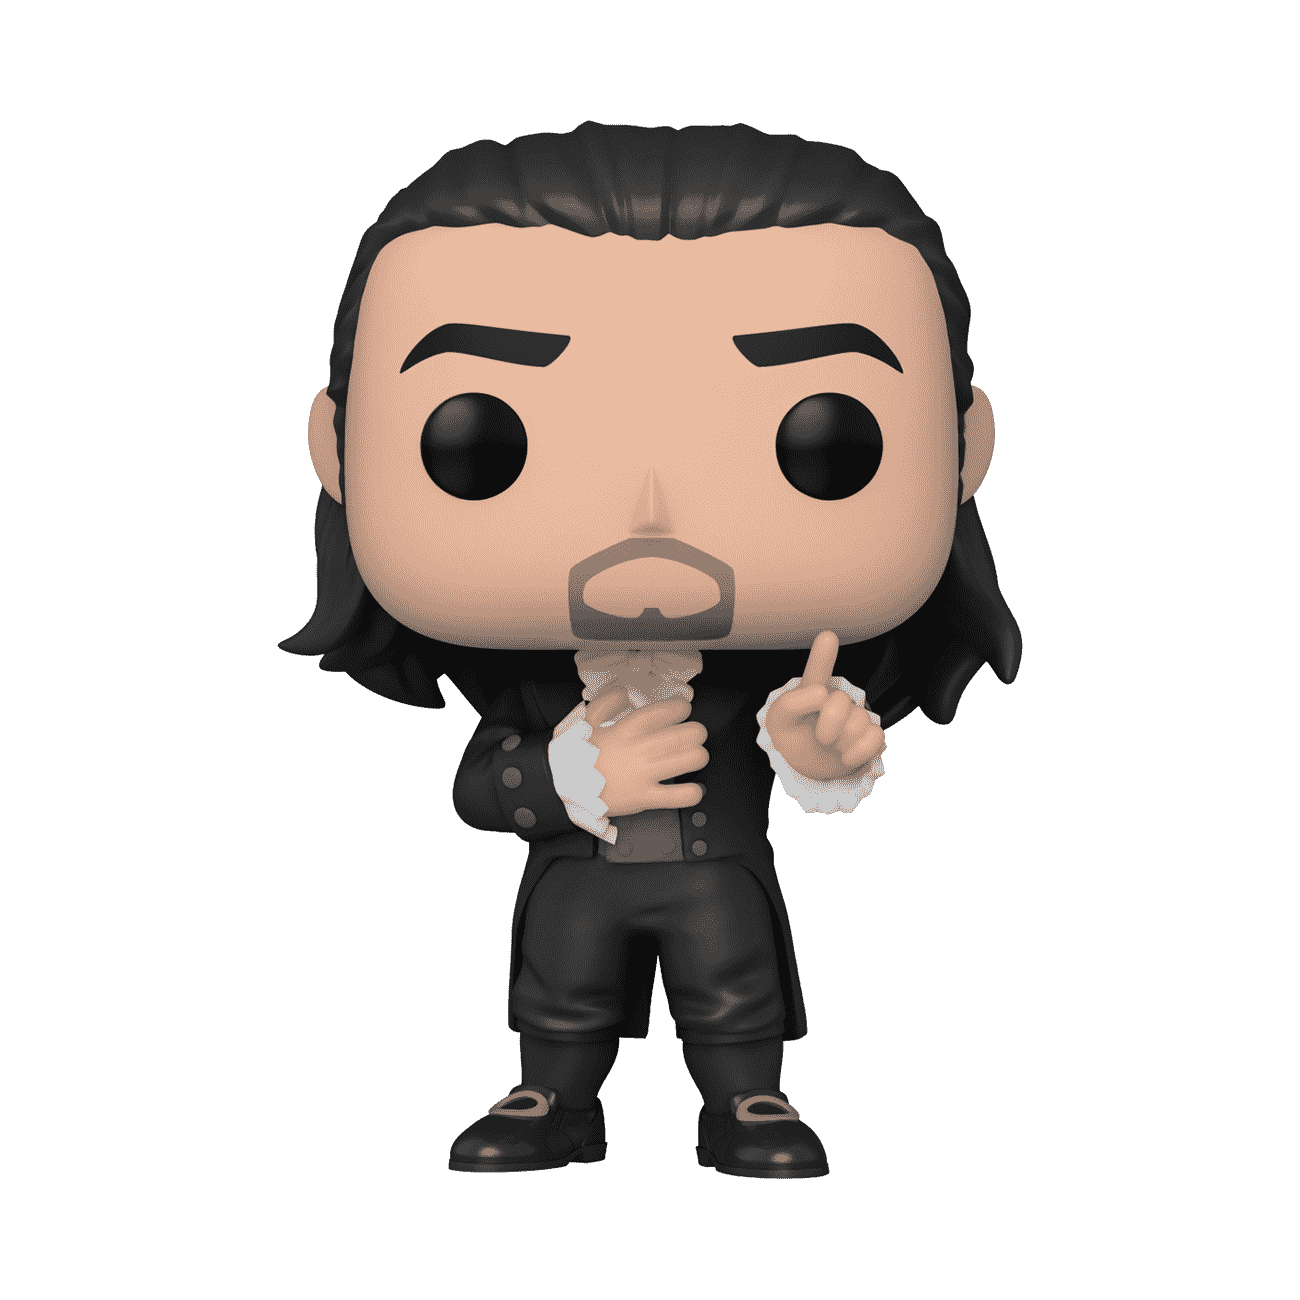 Buy Pop! Alexander Hamilton in Finale Outfit at Funko.